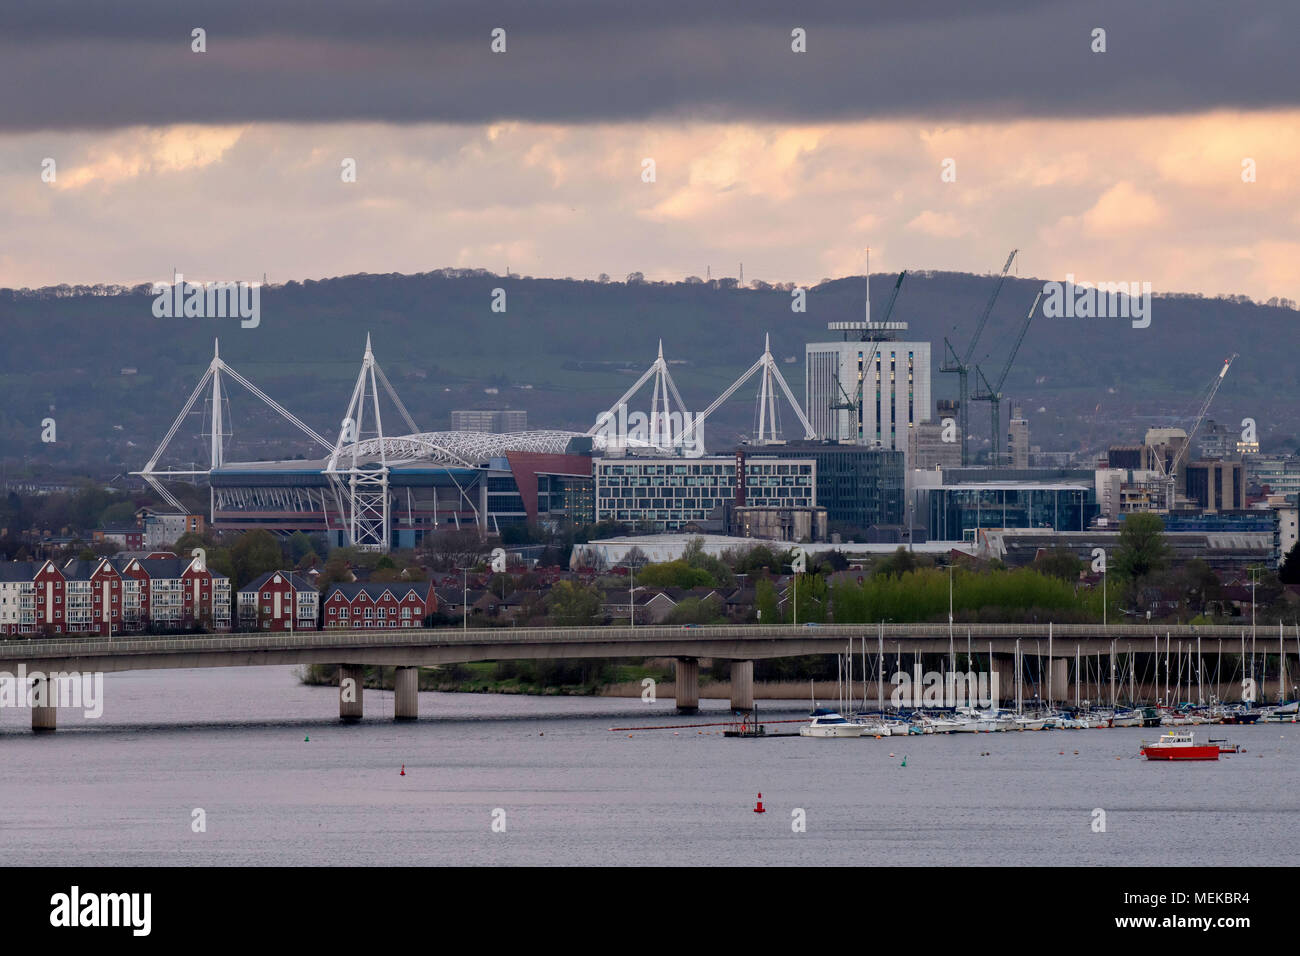 A general view of Cardiff City centre with dark, moody skies showing the Principality Stadium, formerly the Millennium Stadium and River Taff. Stock Photo